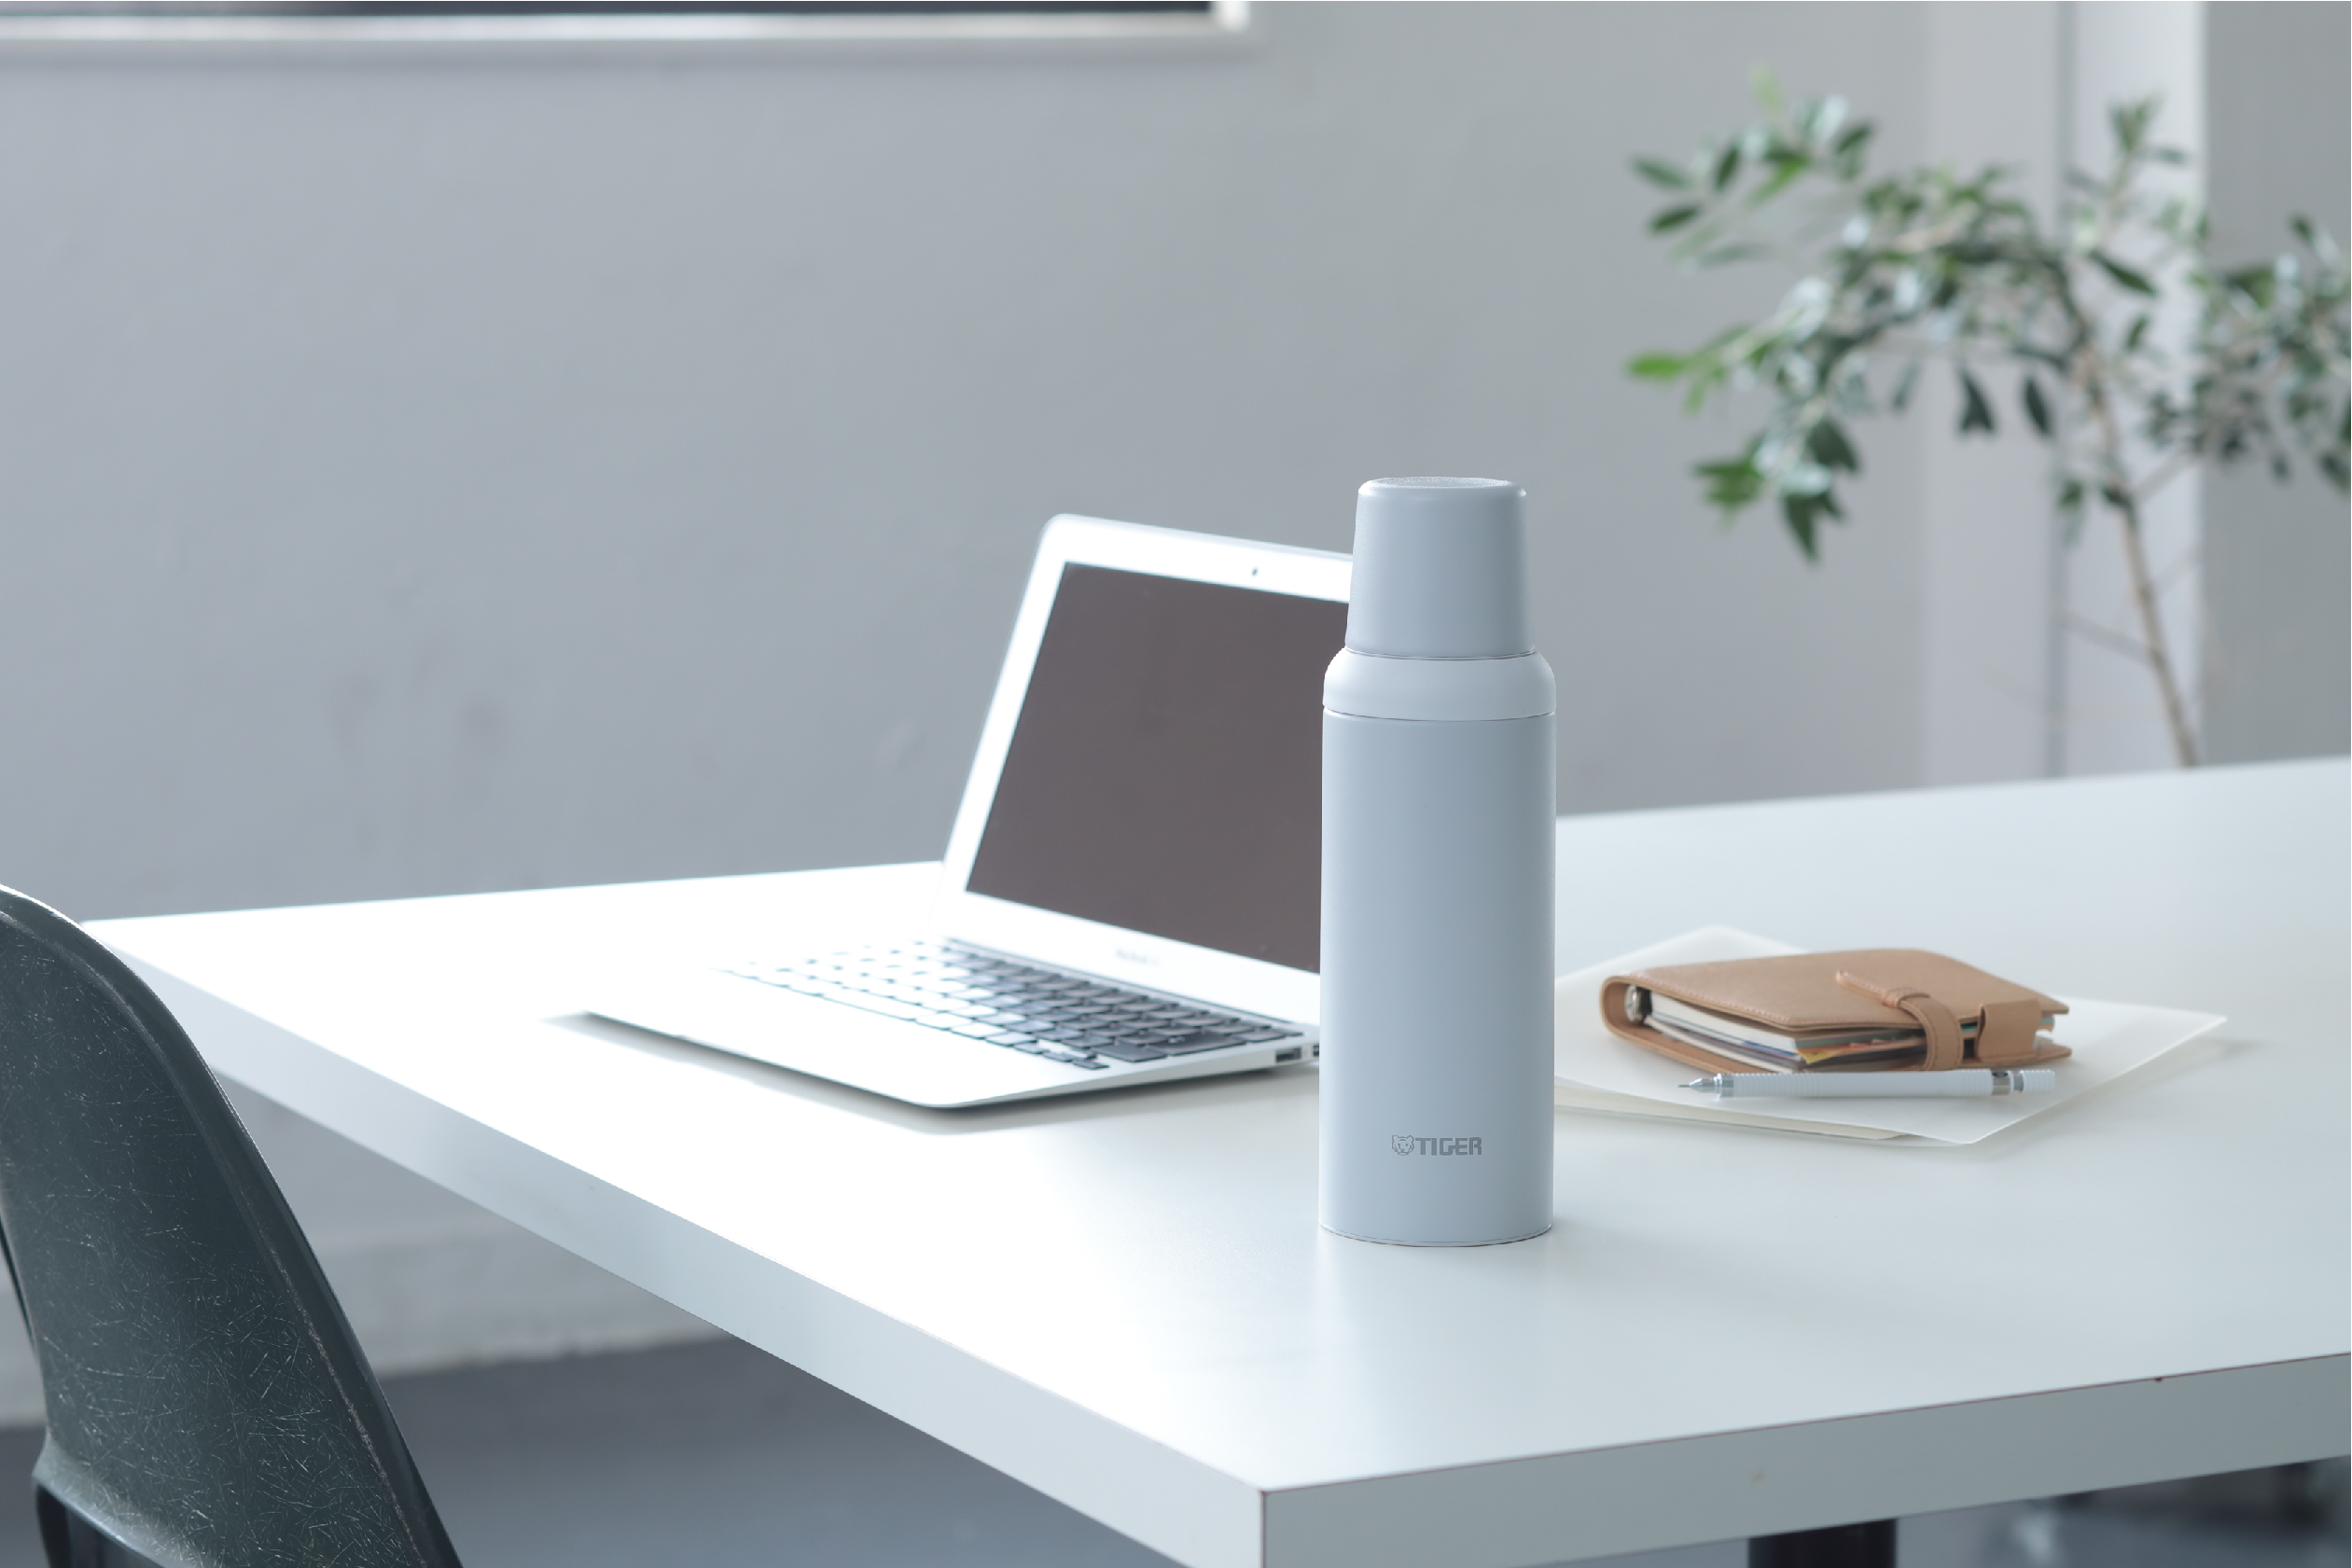 stainless-steel-thermal-bottle-msi-new-subtle-color-tone-grayish-white.jpg (1.22 MB)